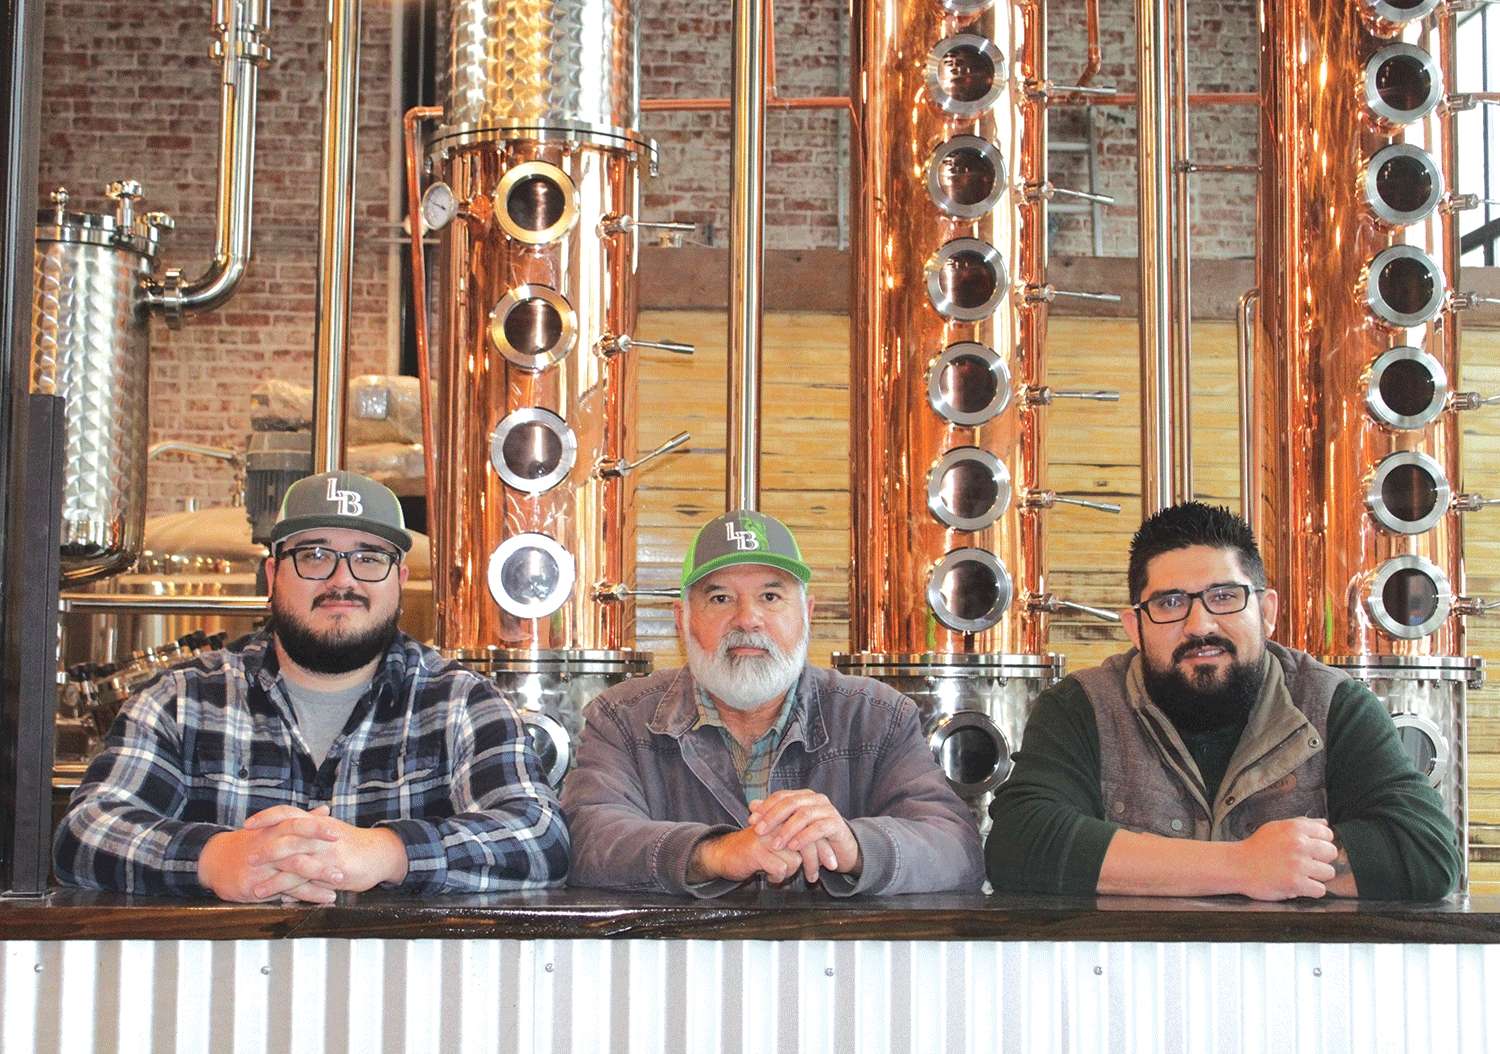 Lake Bottom Brewery and Distillery to open soon